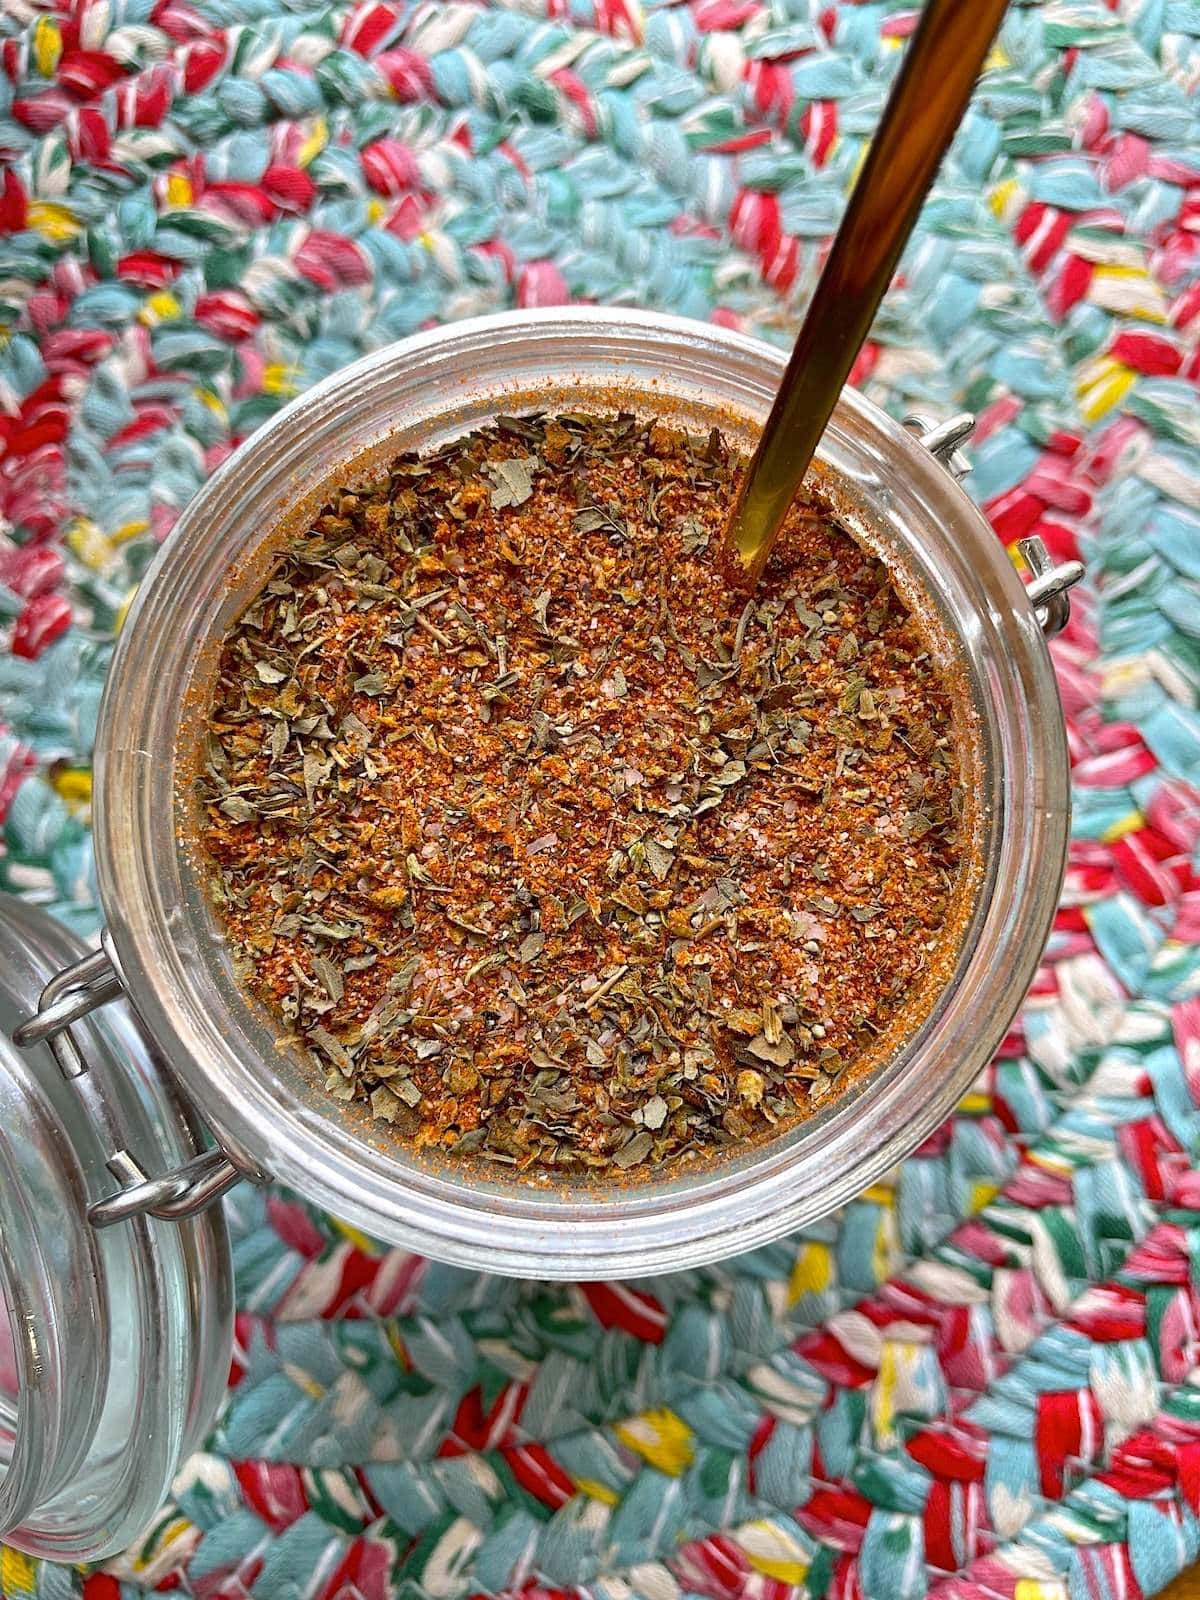 A jar of homemade creole seasoning on a colorful mat with a gold spoon in the jar.